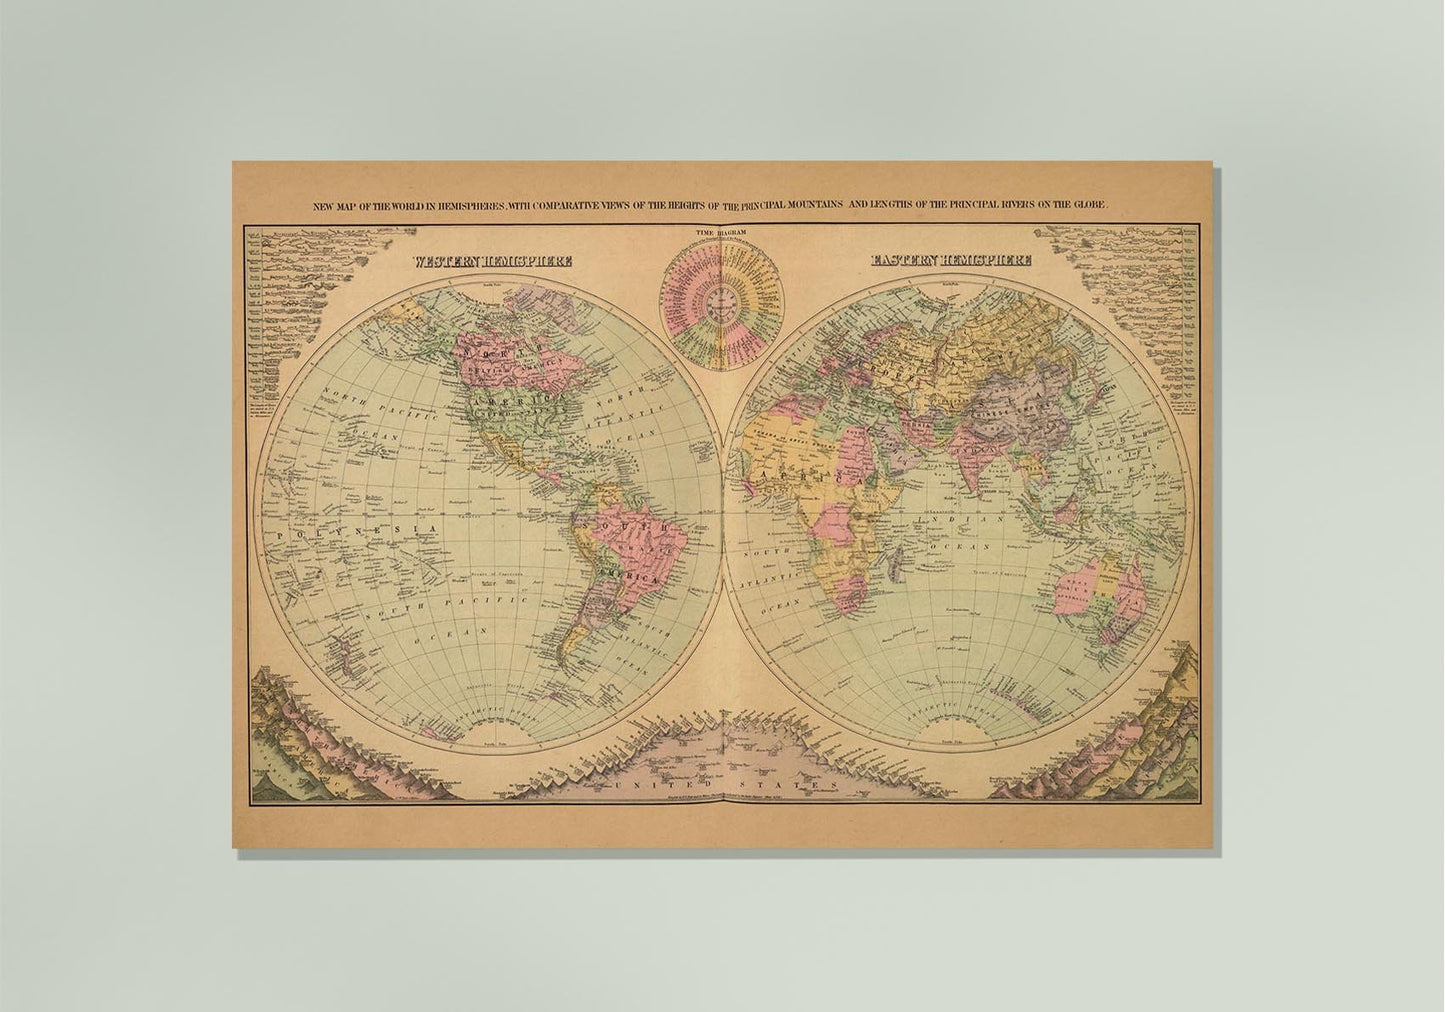 New Map of the World with Hemispheres